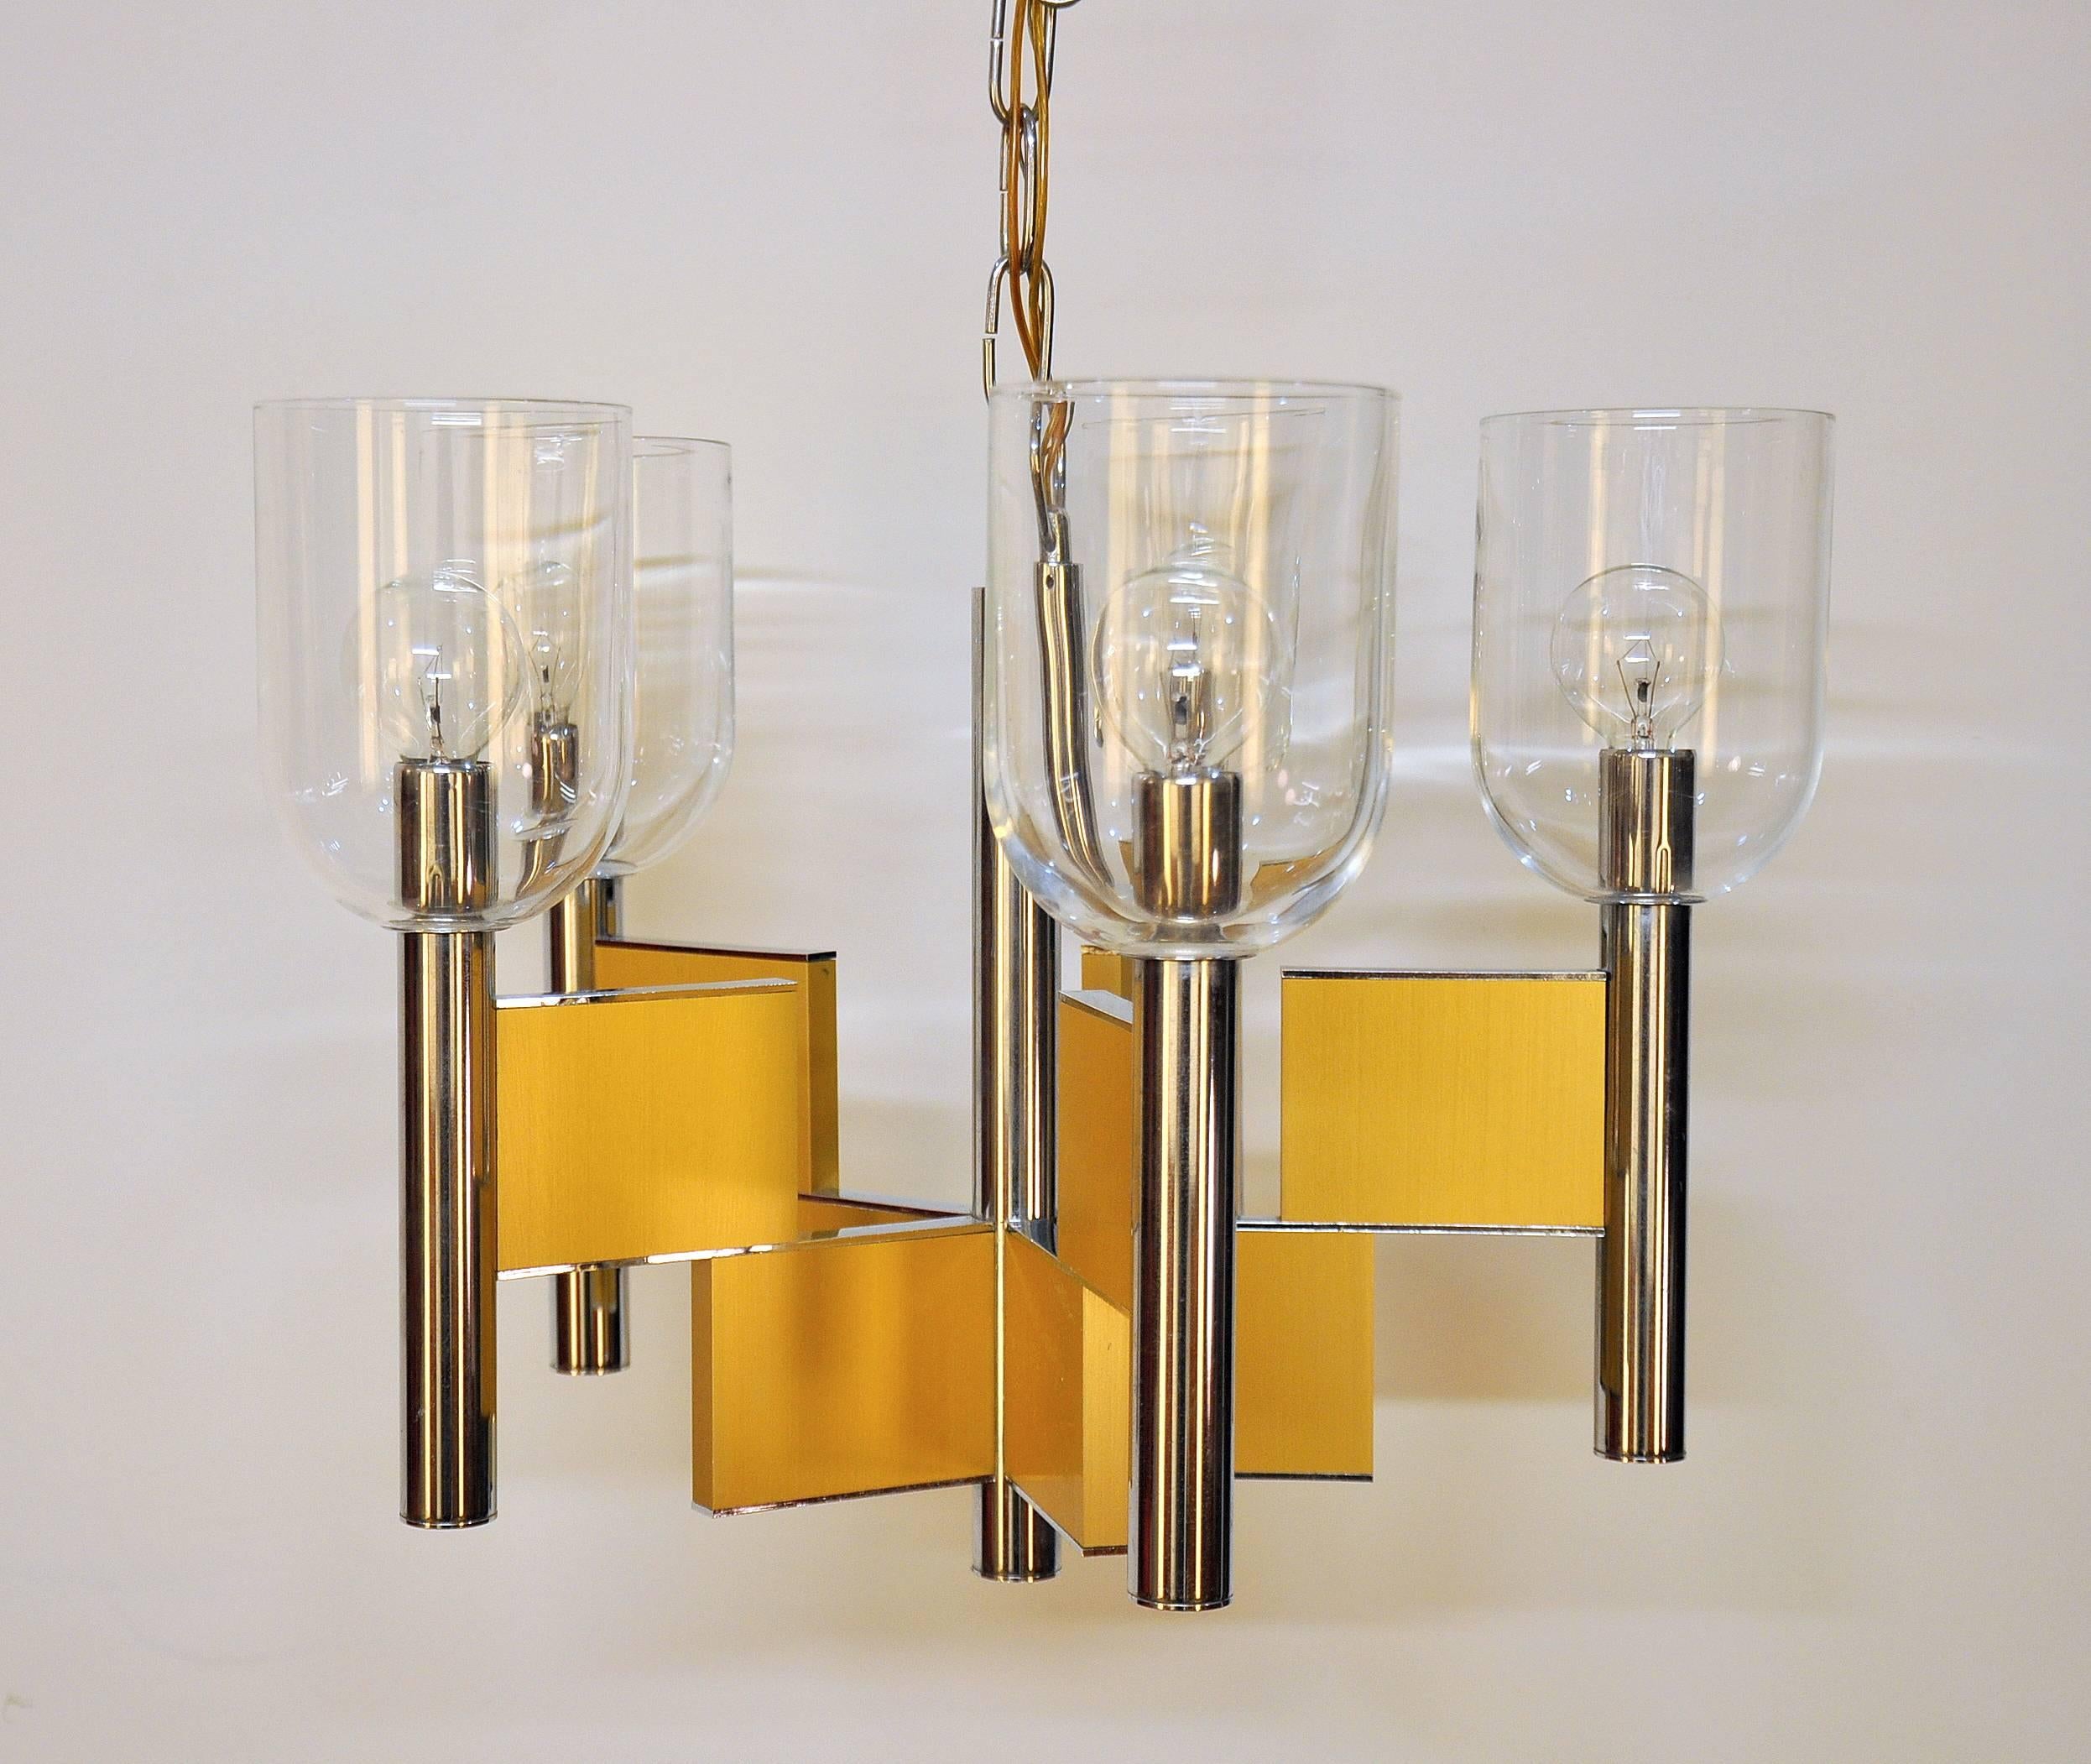 Sharp Italian mid-century modern pendant light fixture from the Geometric series featuring the enticing juxtaposition of satin brass and polished chrome elements arranged in an architectural format that Angelo Gaetano Sciolari is famous for.